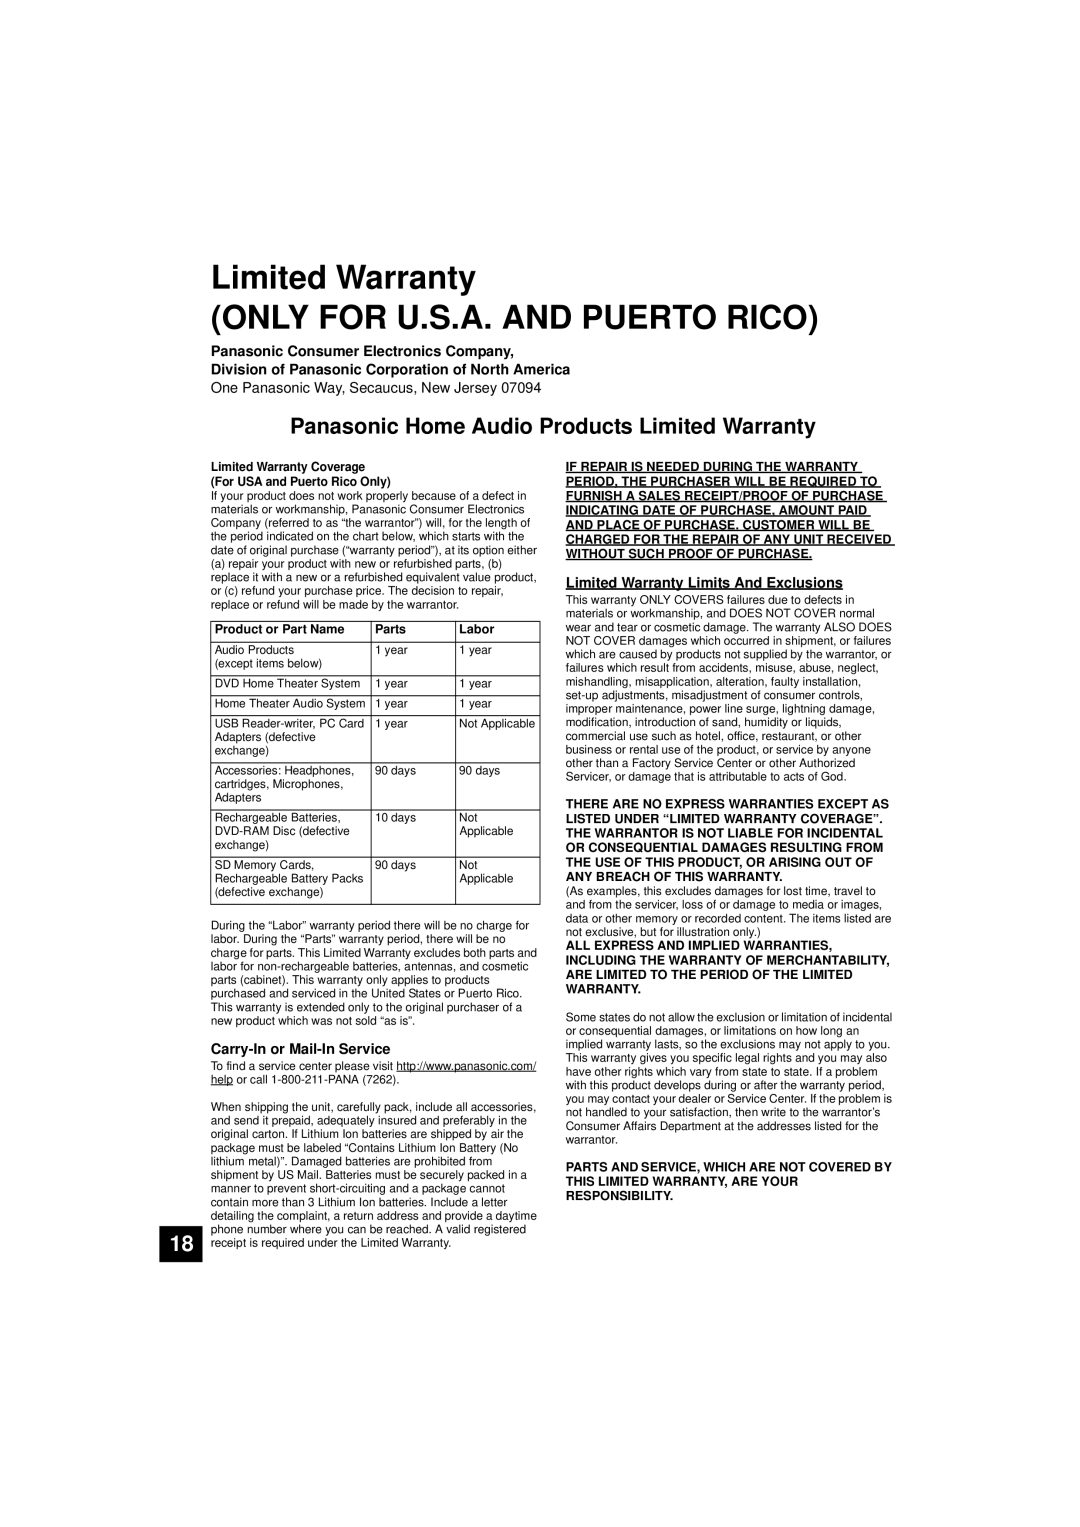 Panasonic SC-HTB10 Limited Warranty ONLY FOR U.S.A. AND PUERTO RICO, Panasonic Home Audio Products Limited Warranty 